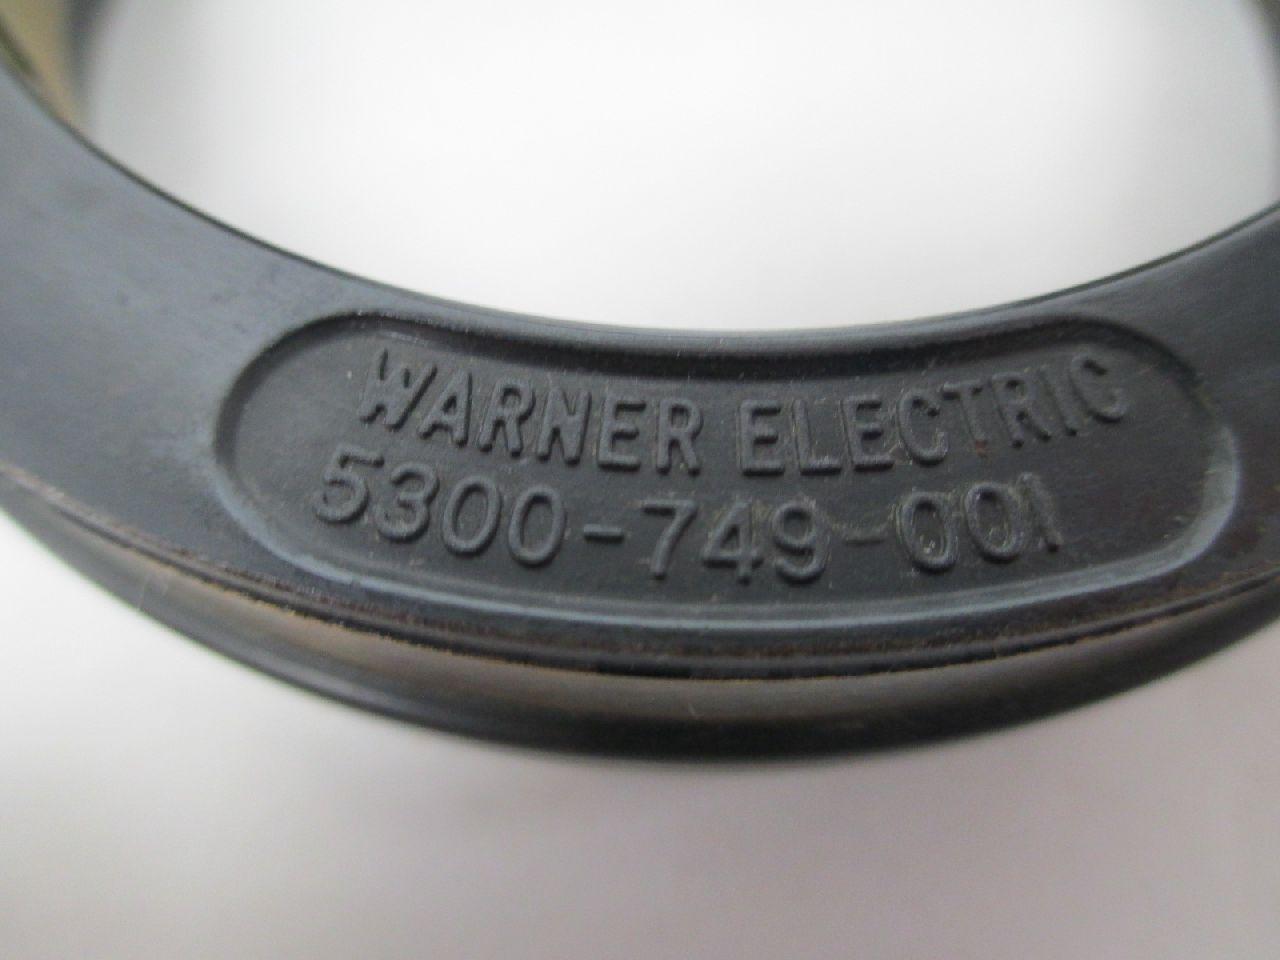 WARNER ELECTRIC 5300-749-001 CLUTCH MAGNET COUPLING COLLECTOR RING 